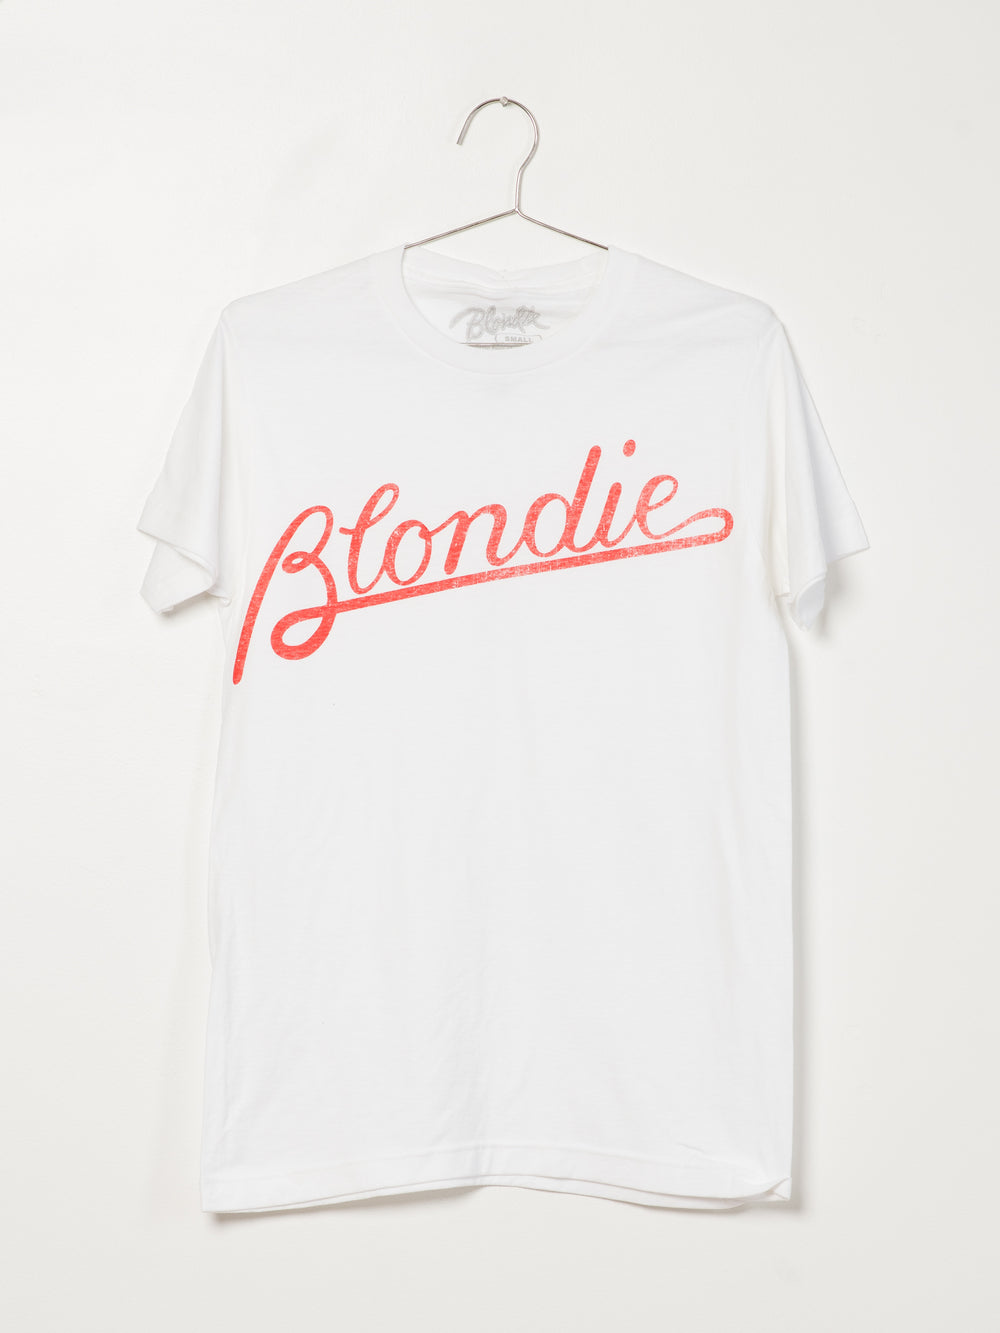 GOODIE TWO SLEEVE BLONDIE TILTED LOGO T-SHIRT - CLEARANCE